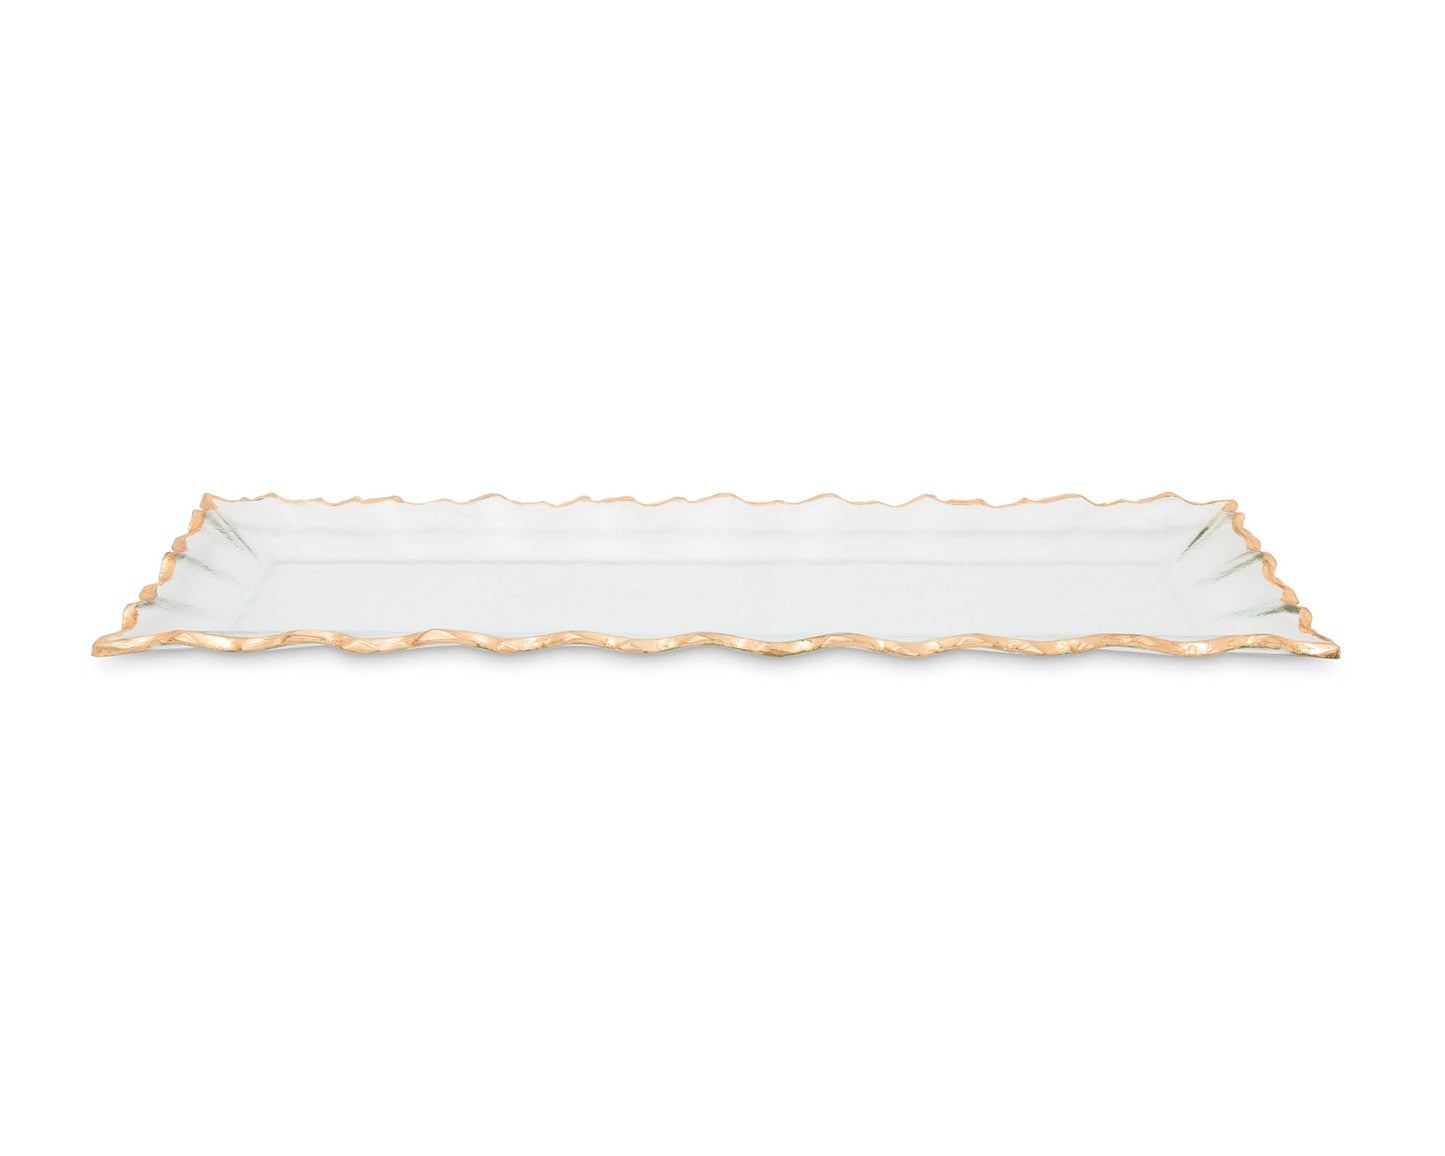 Glass Rectangular Tray with Gold Edge Serving Bowls High Class Touch - Home Decor 